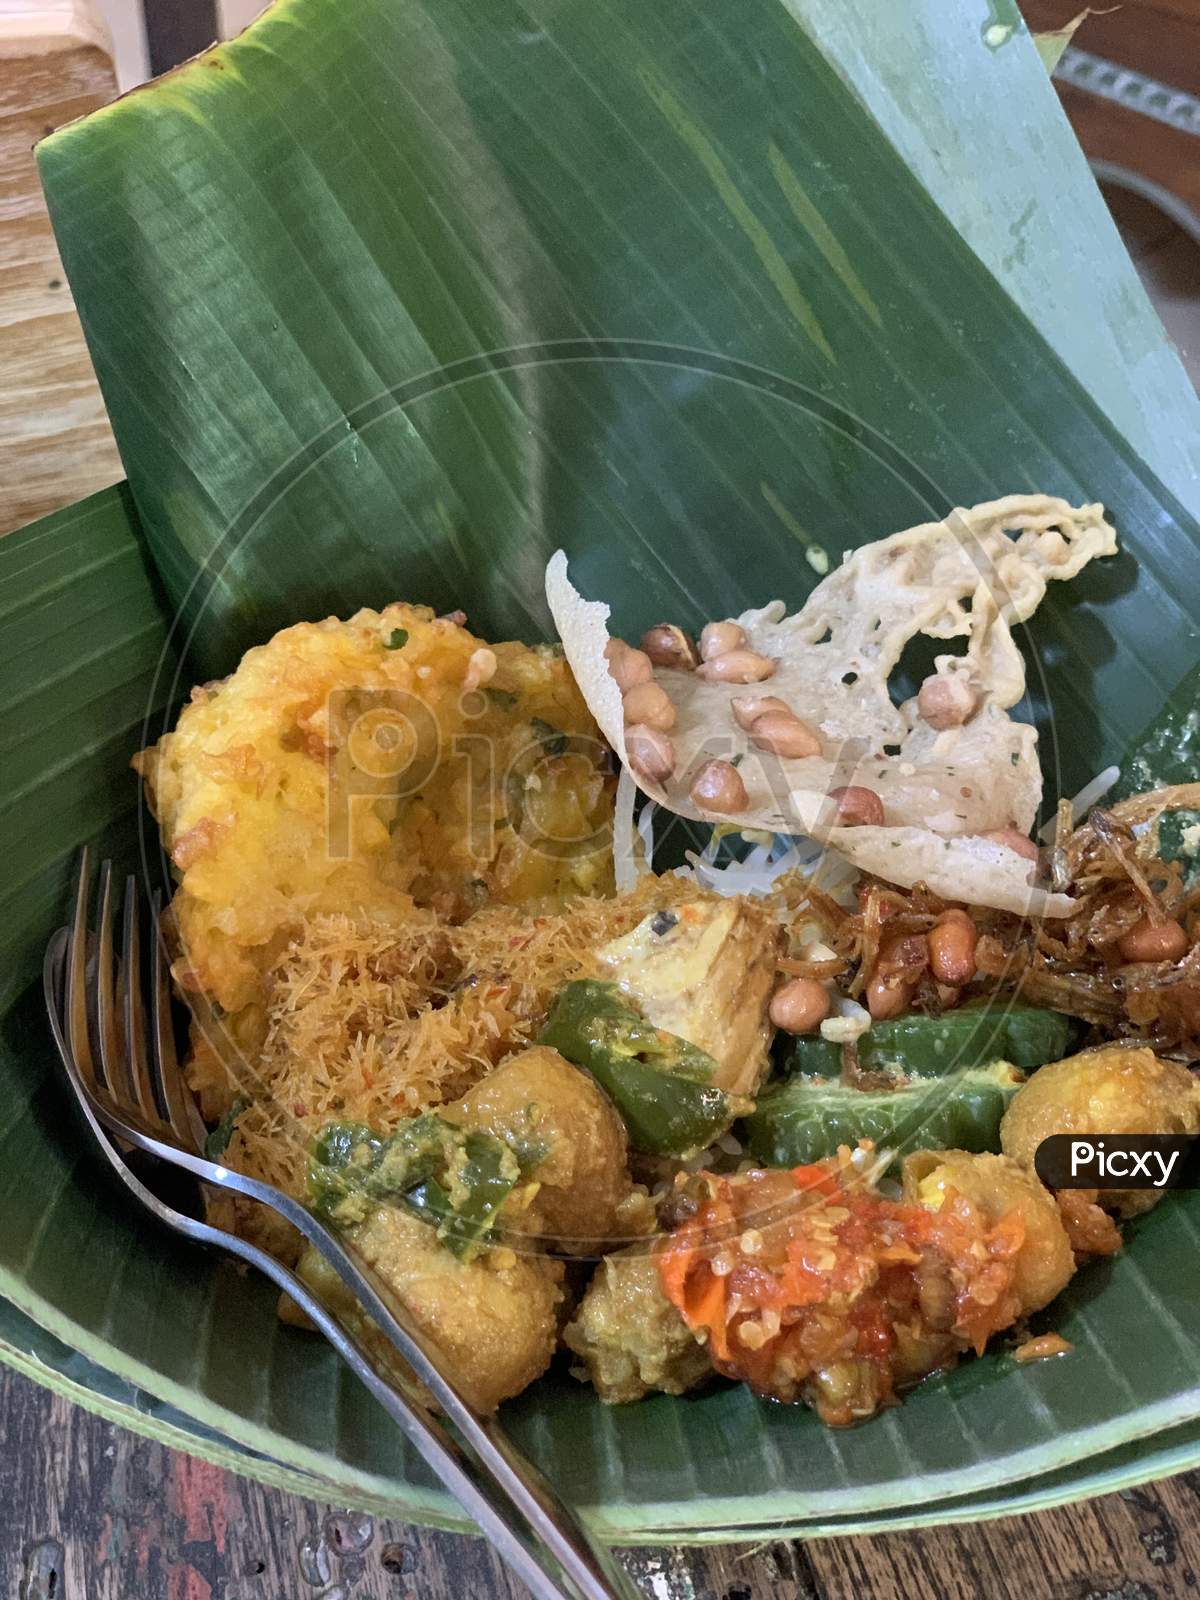 Traditional spicy rice bowl, using banana leaf "nasi pincuk" original from central Java